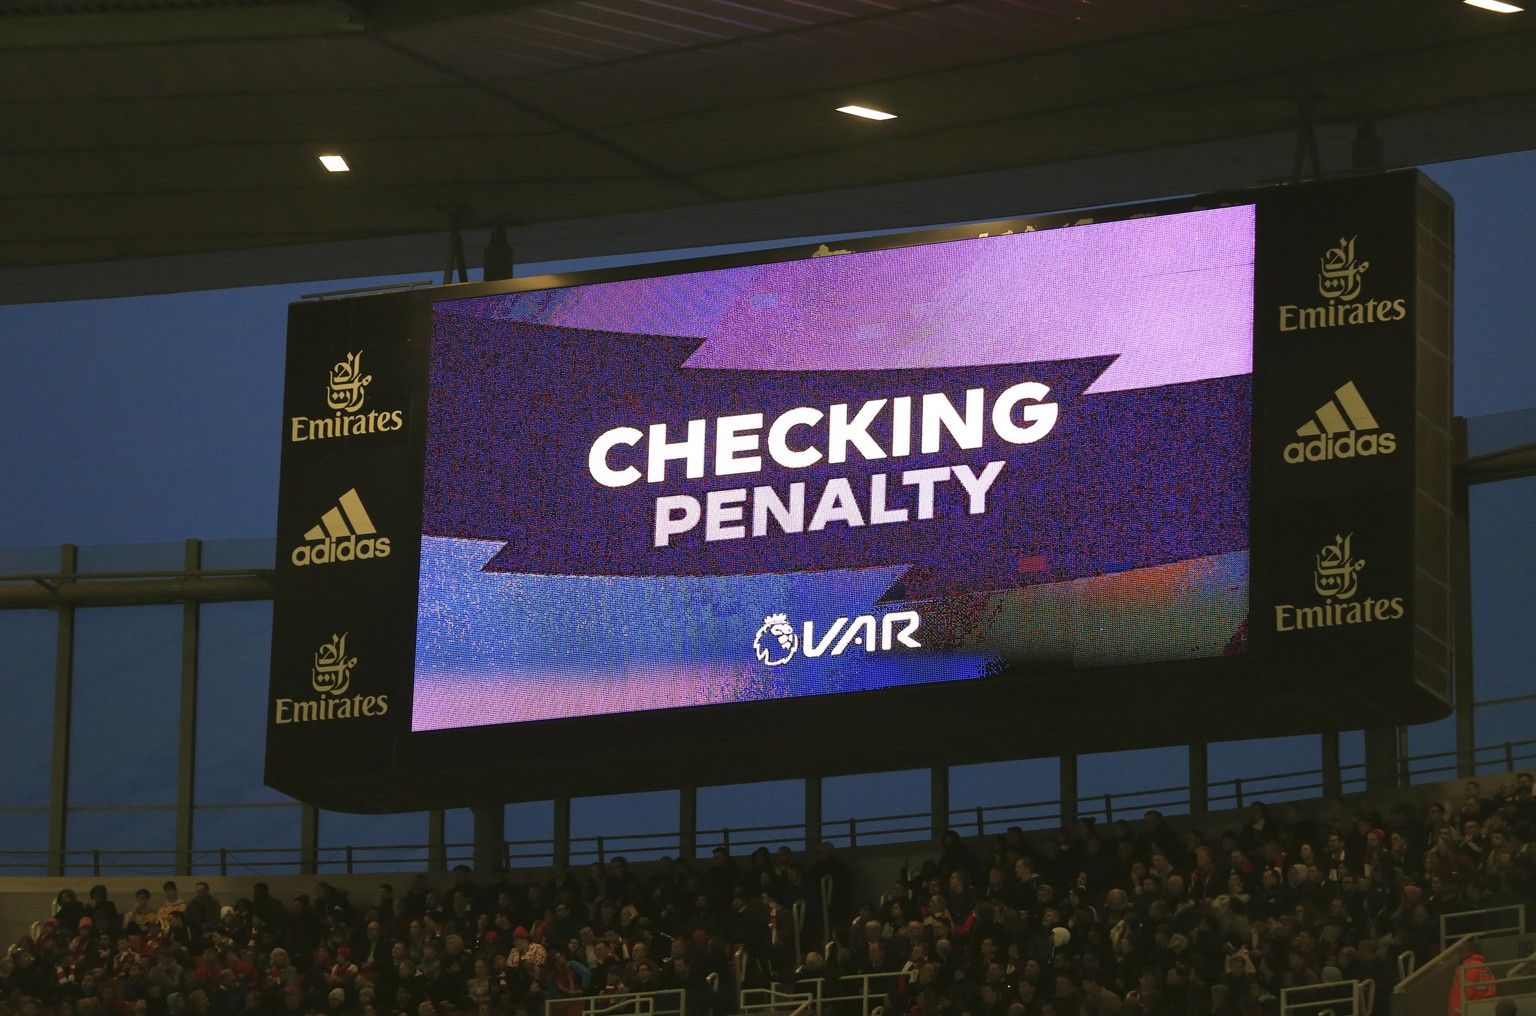 A scoreboard displays the VAR during the English Premier League soccer match between Arsenal and Crystal Palace at the Emirates stadium in London, Sunday, Oct. 27, 2019. (AP Photo/Leila Coker)